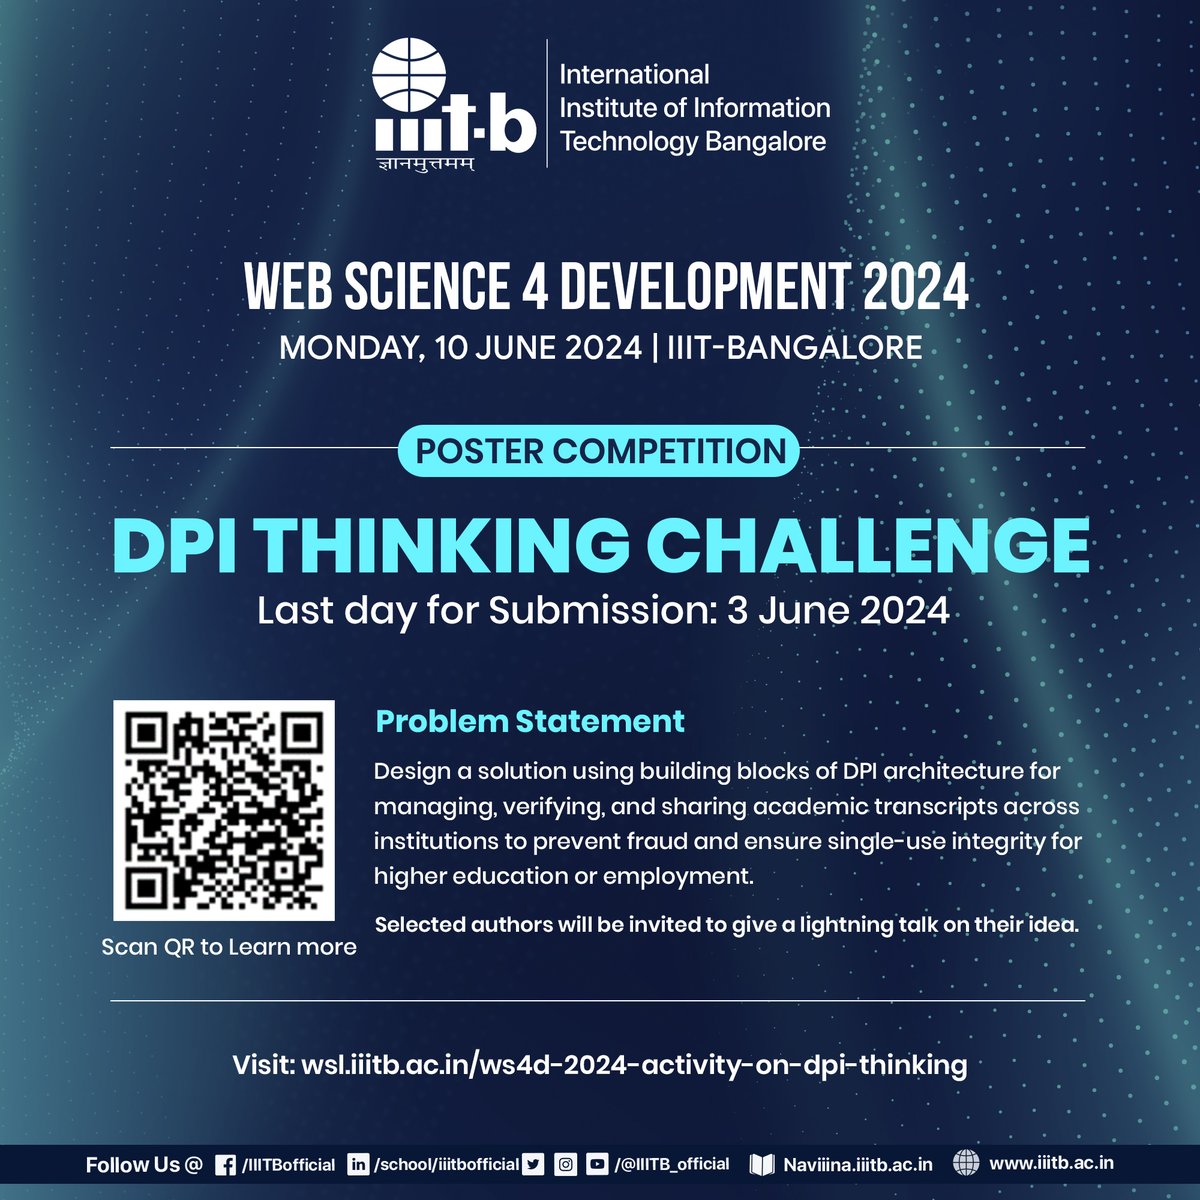 #WS4D 2024 Poster Competition 
DPI Thinking Challenge
Date: June 10, 2024
Deadline for submissions: June 3, 2024

Details on Competition: wsl.iiitb.ac.in/ws4d-2024-acti… 

Details on WS4D 2024: wsl.iiitb.ac.in/workshop-on-we… 

#WS4D  #postercompetition #DPI